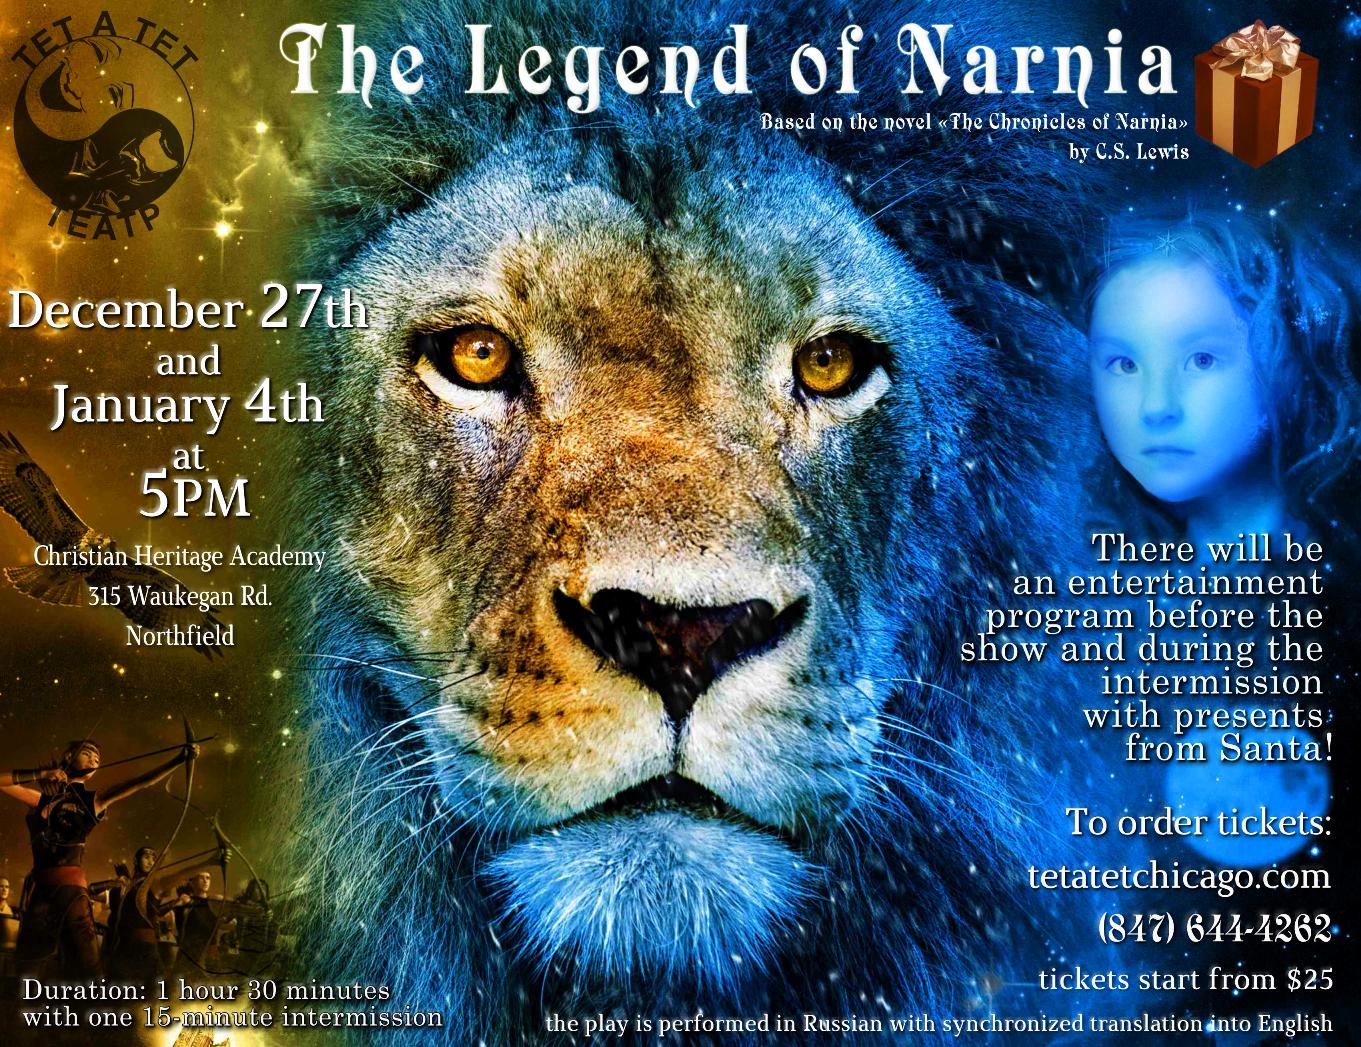 The Legend of Narnia